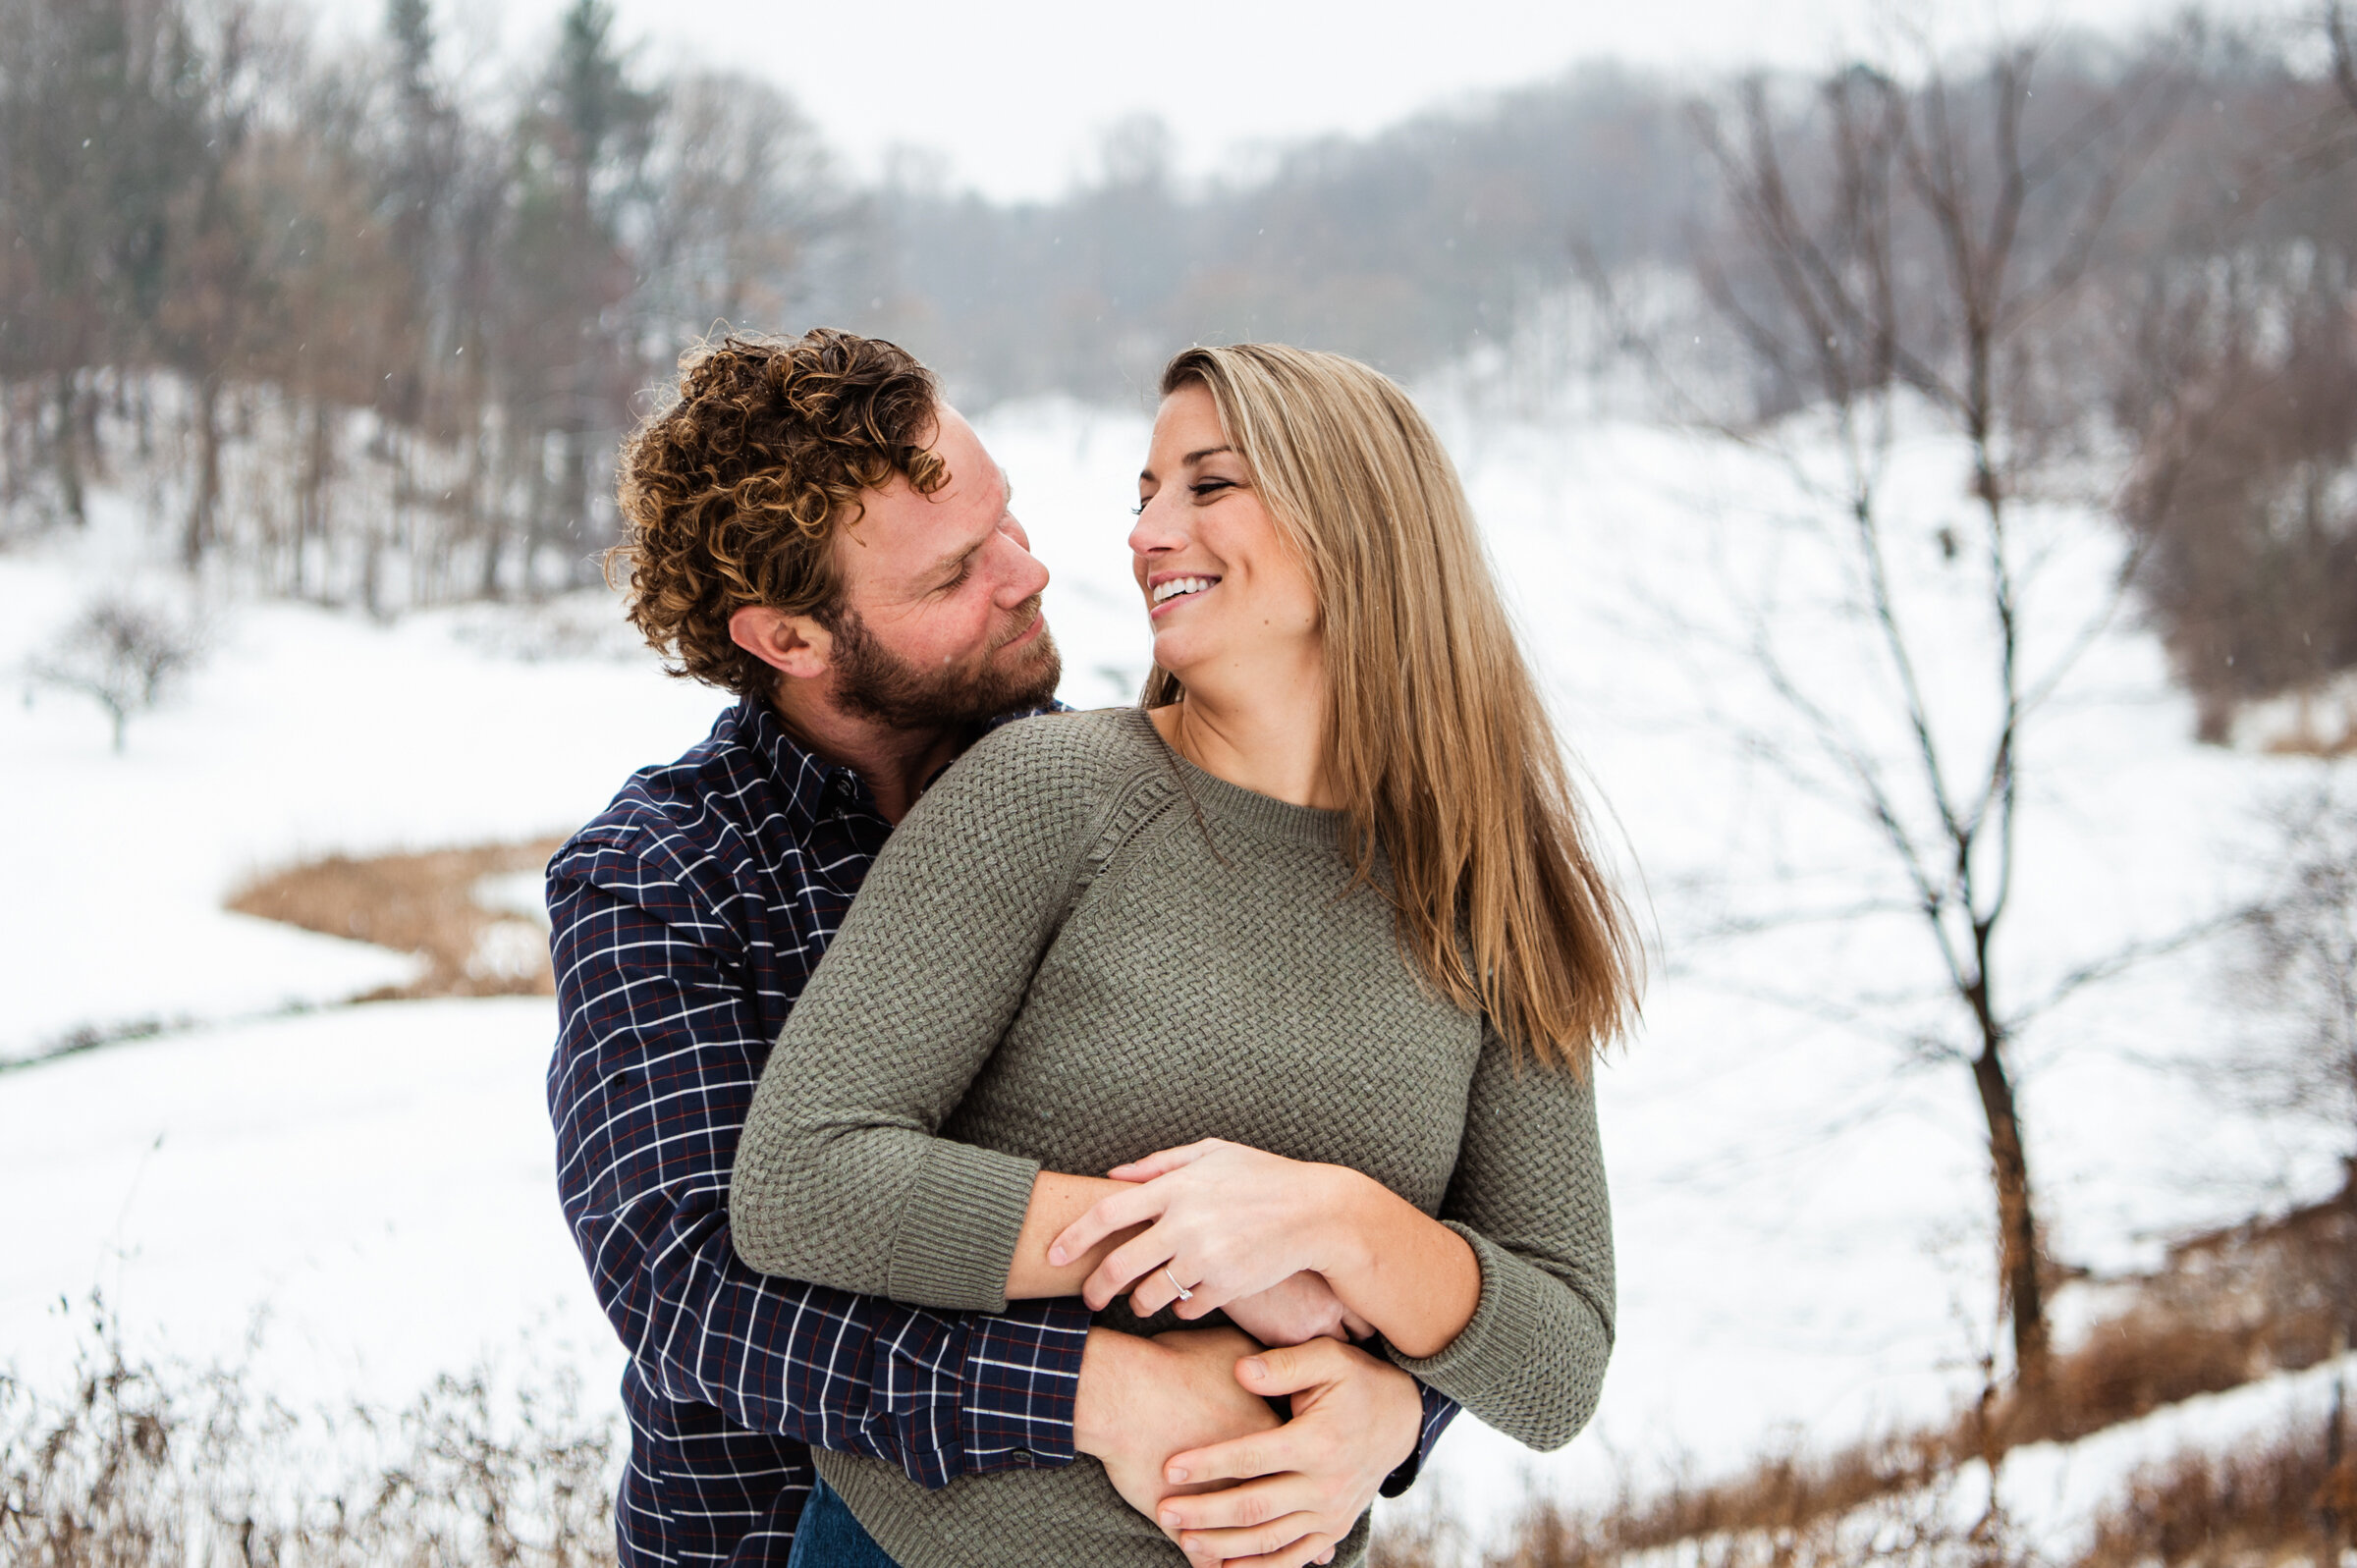 Irondequoit_Beer_Company_Durand_Eastman_Park_Rochester_Engagement_Session_JILL_STUDIO_Rochester_NY_Photographer_7087.jpg